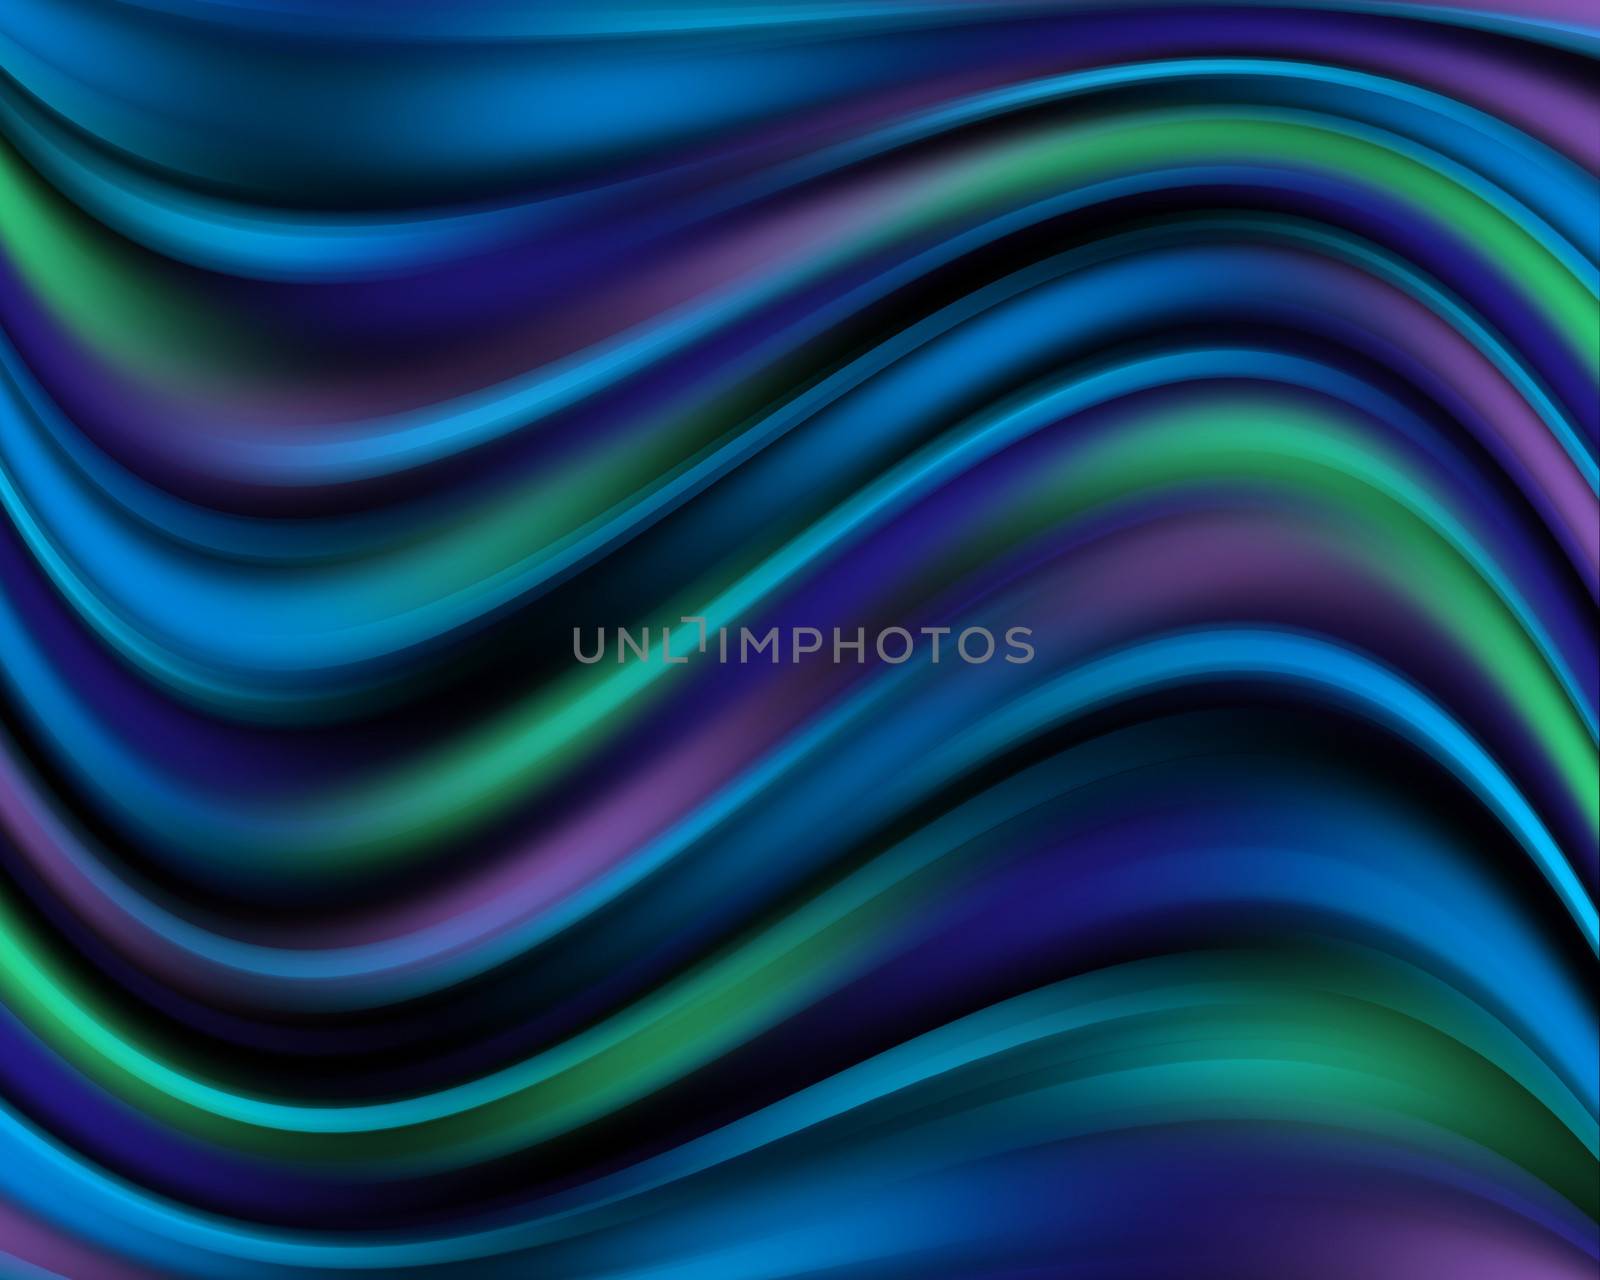 Blue, green and purple wavy lines by Balefire9